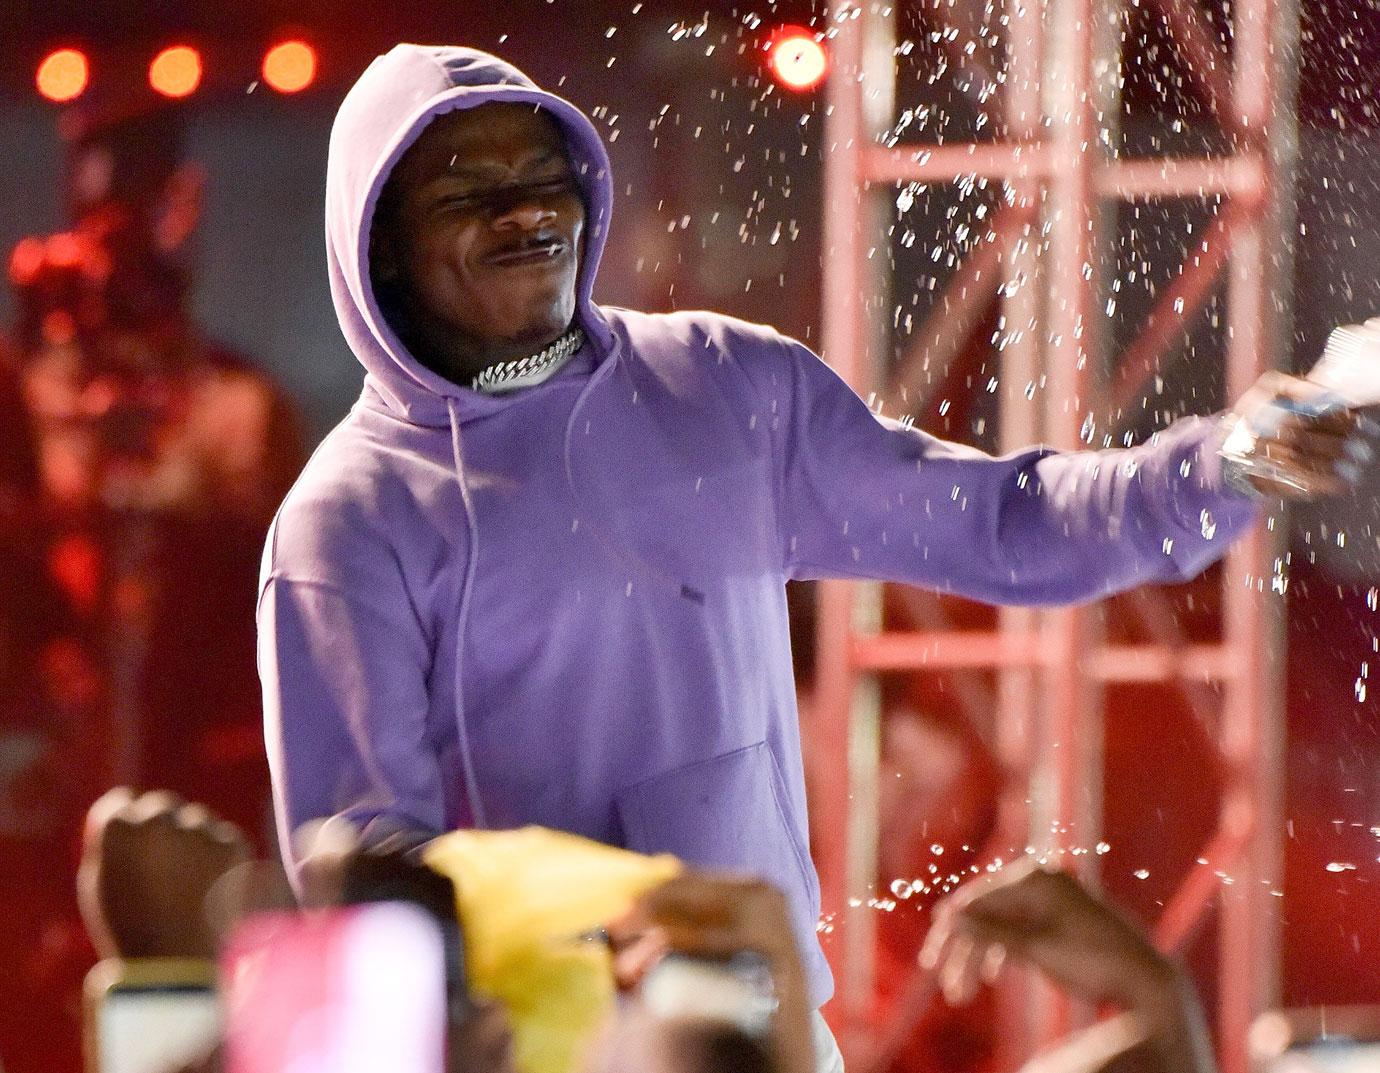 DaBaby dropped by fashion brand Boohoo over inexcusable homophobic rant